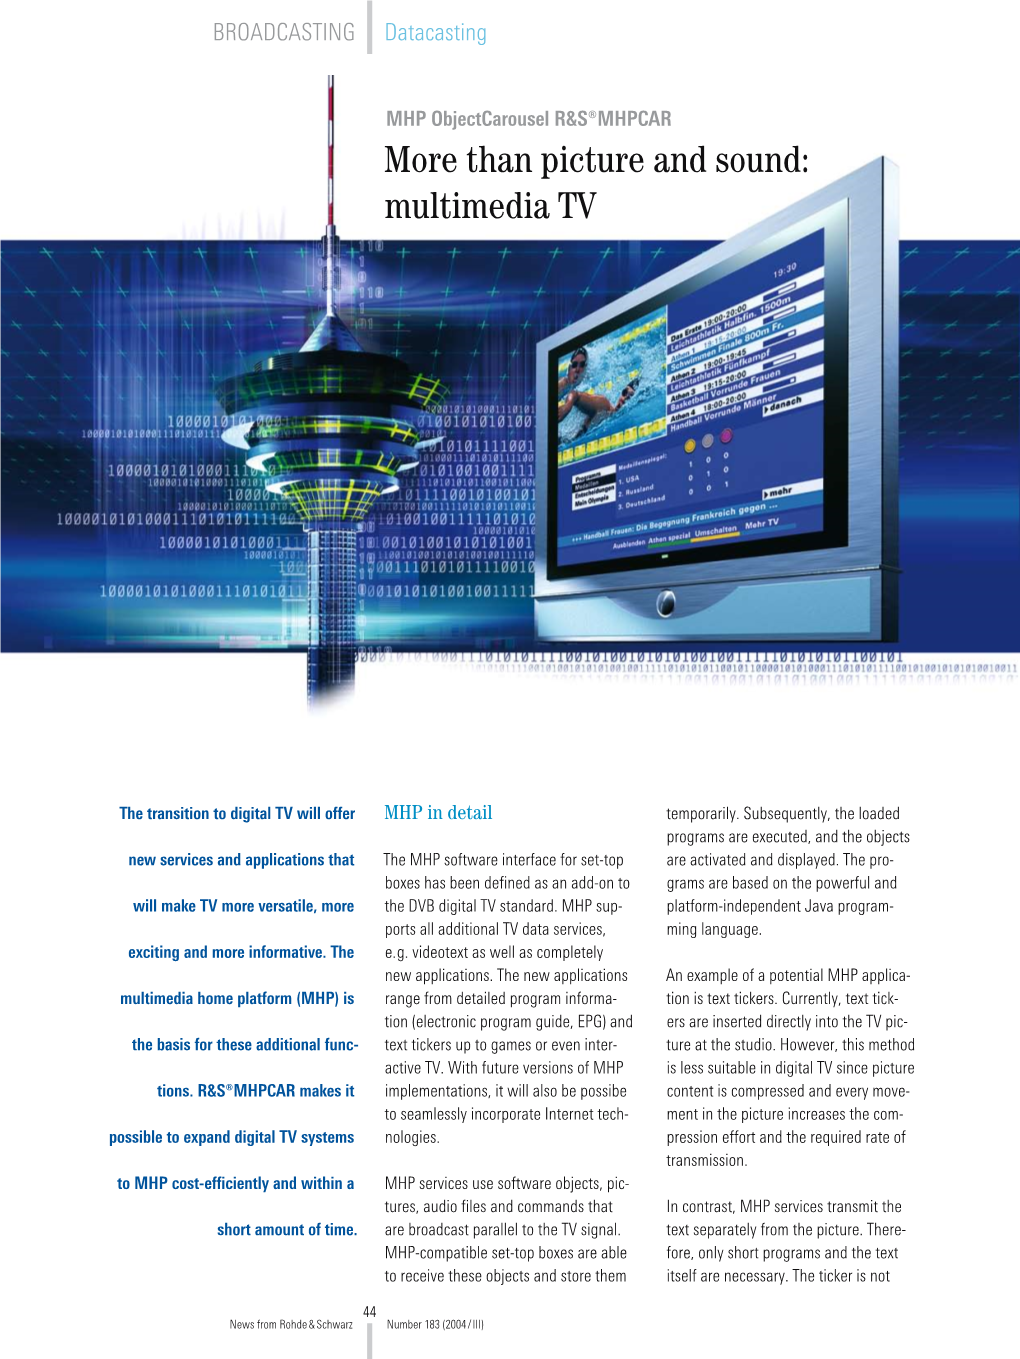 More Than Picture and Sound: Multimedia TV